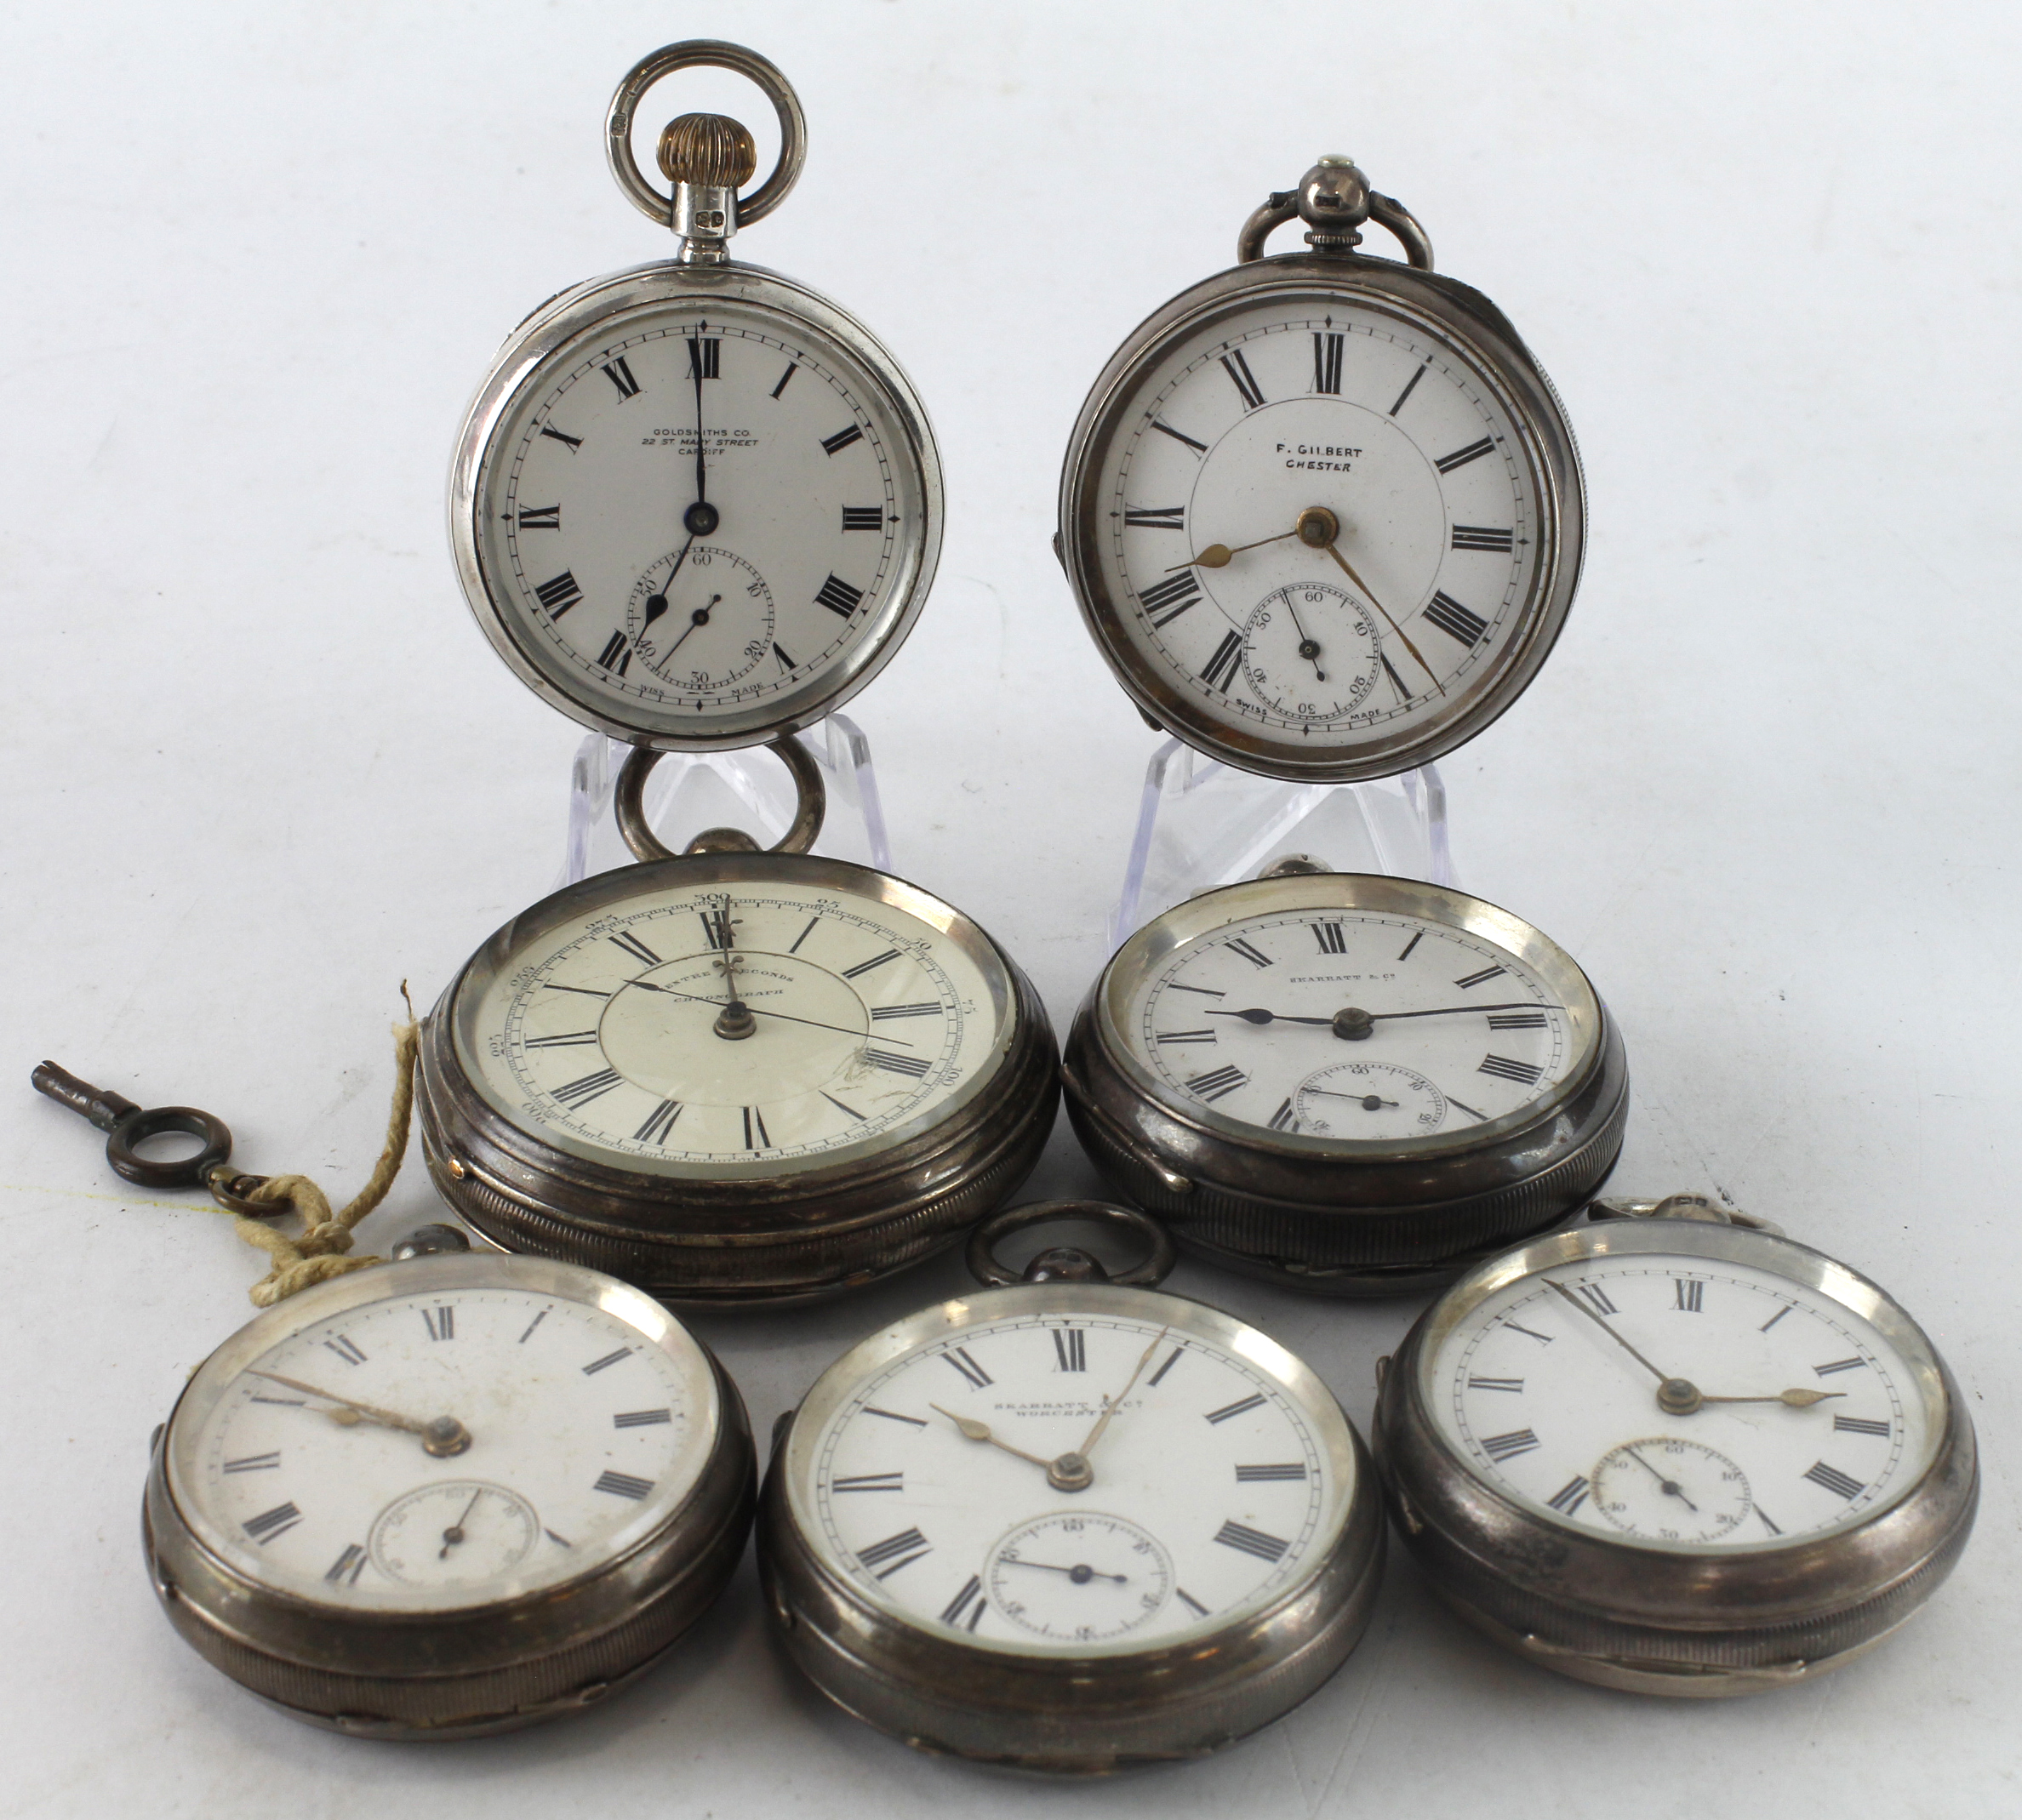 Assortment of seven gents silver cased pocket watches, one a centre seconds chronograph. Case